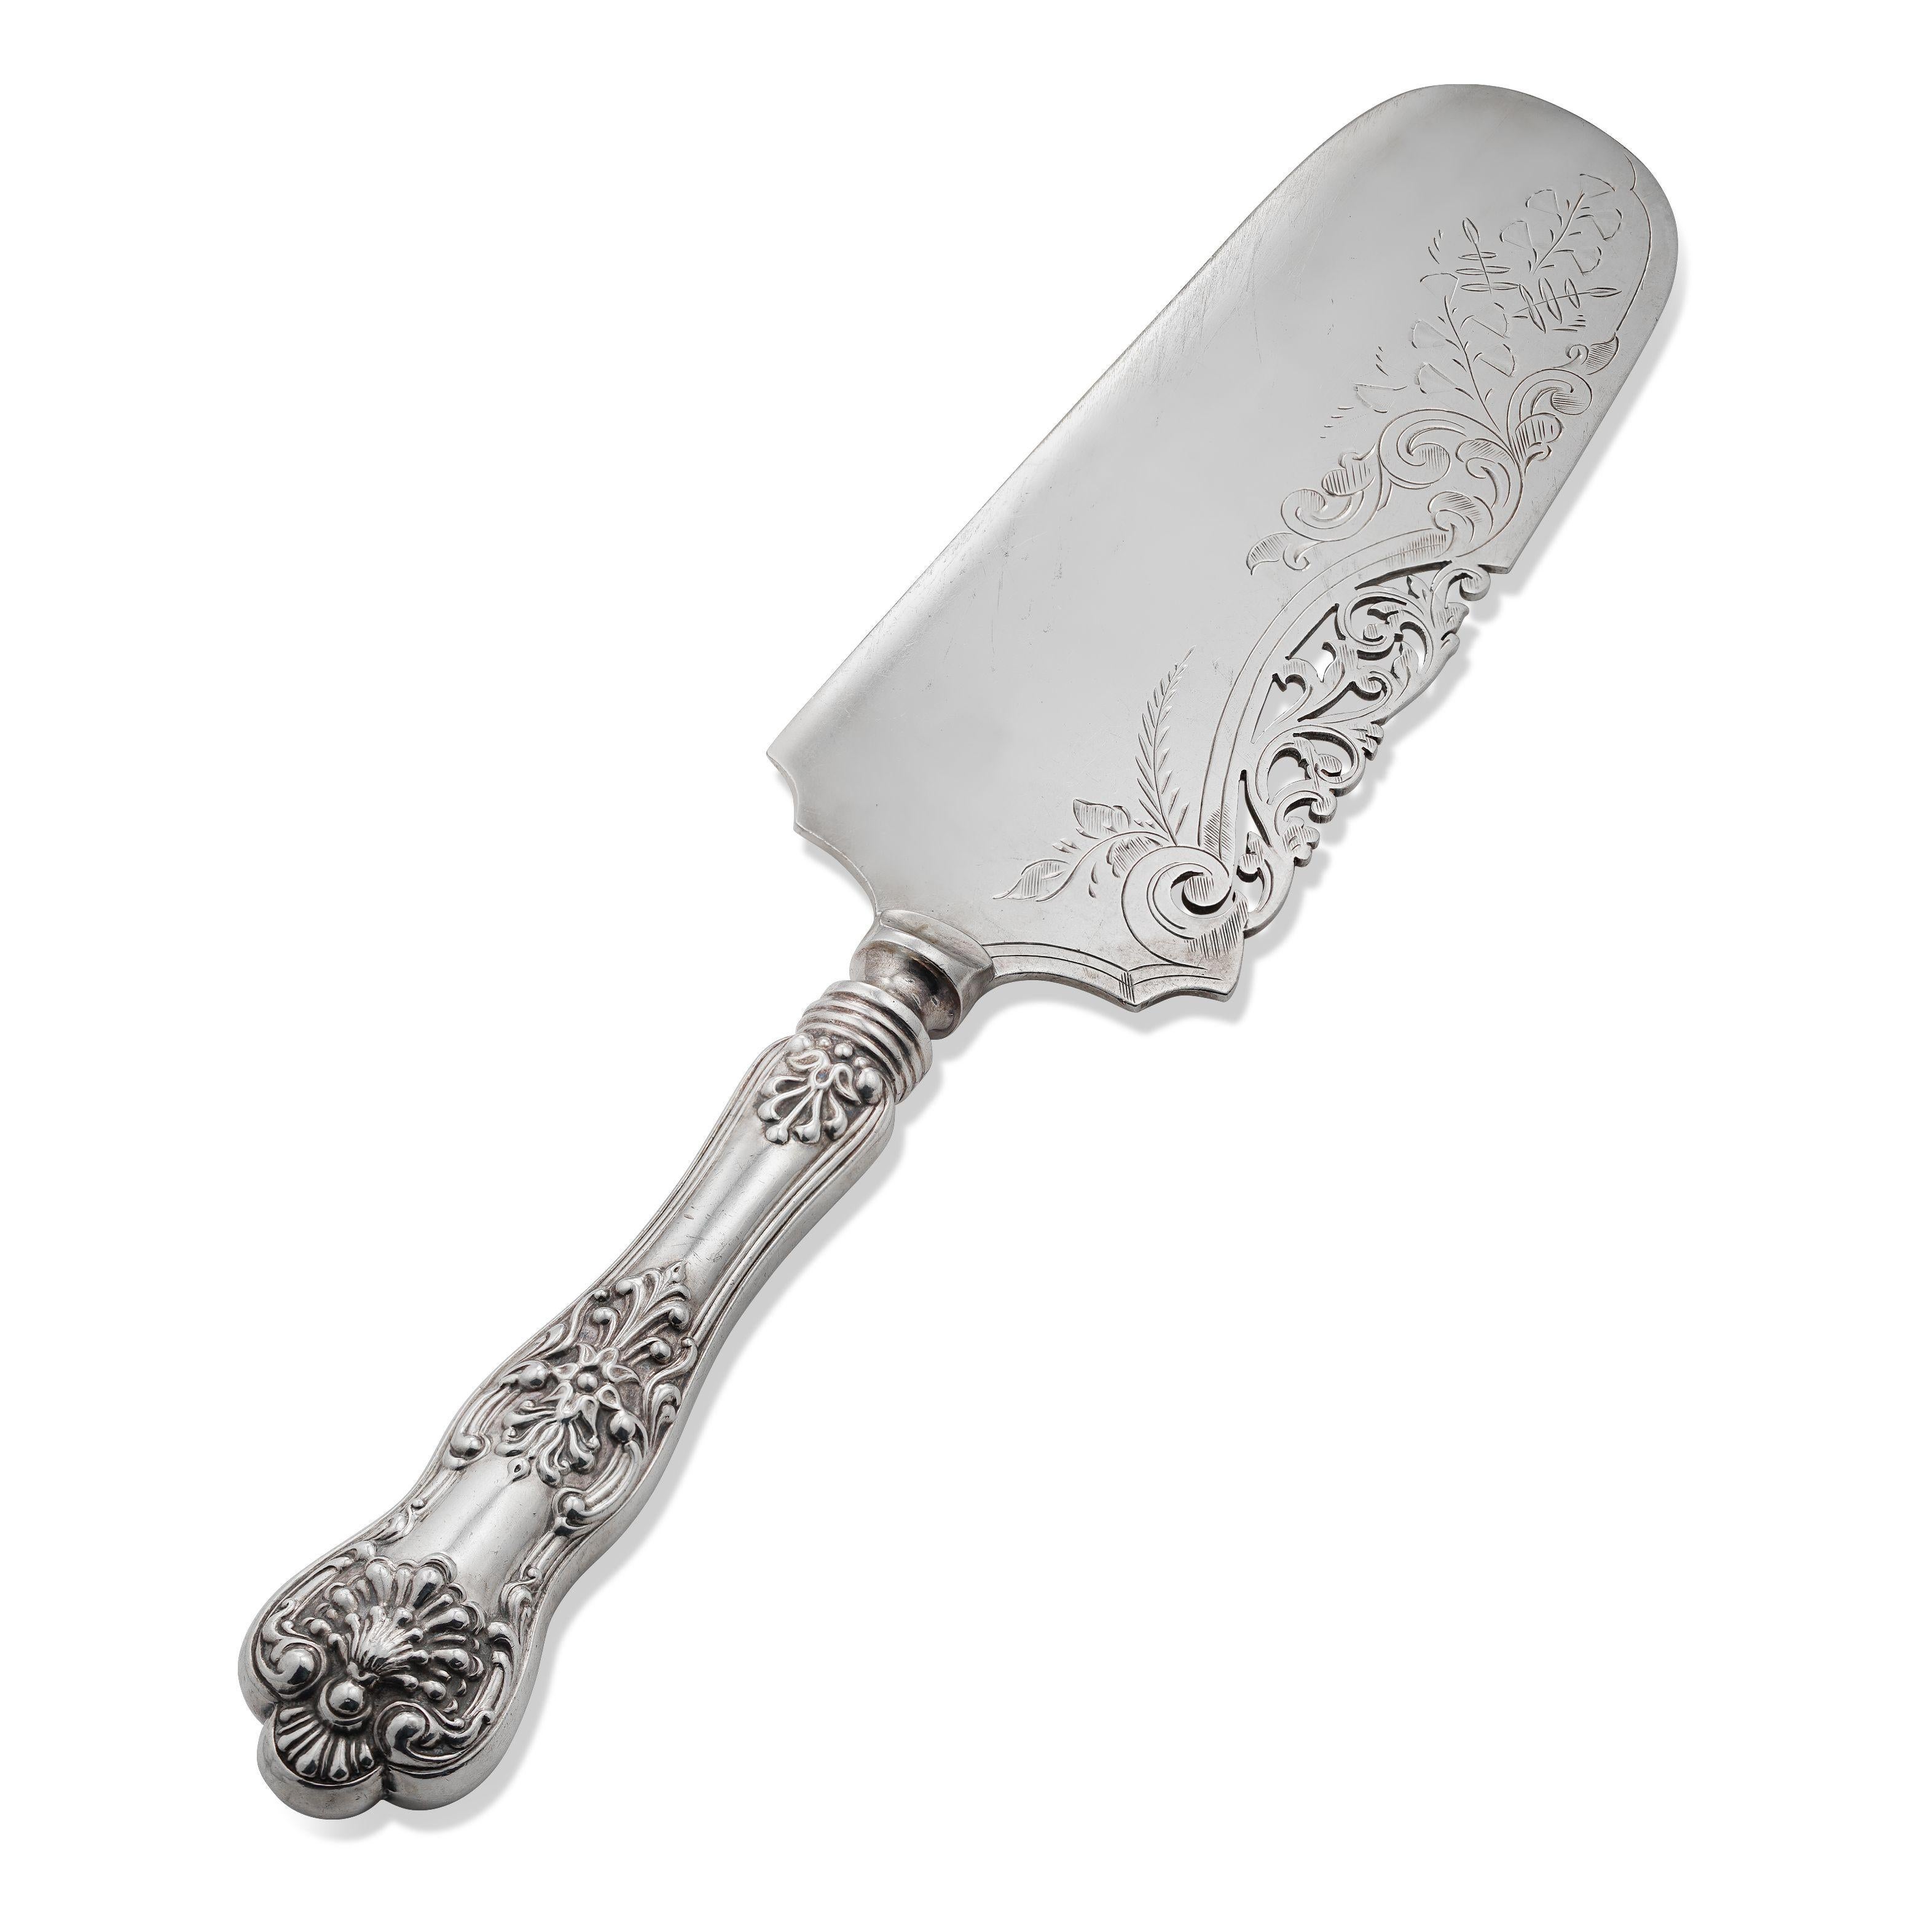 Impressive Sterling Silver Cake Pie Server by Birks. Beautiful Ornate designs on handle and serving area. Marked: BIRKS STERLING. Approx. 10.5” L x 2” W. Beautiful and Functional! 

 